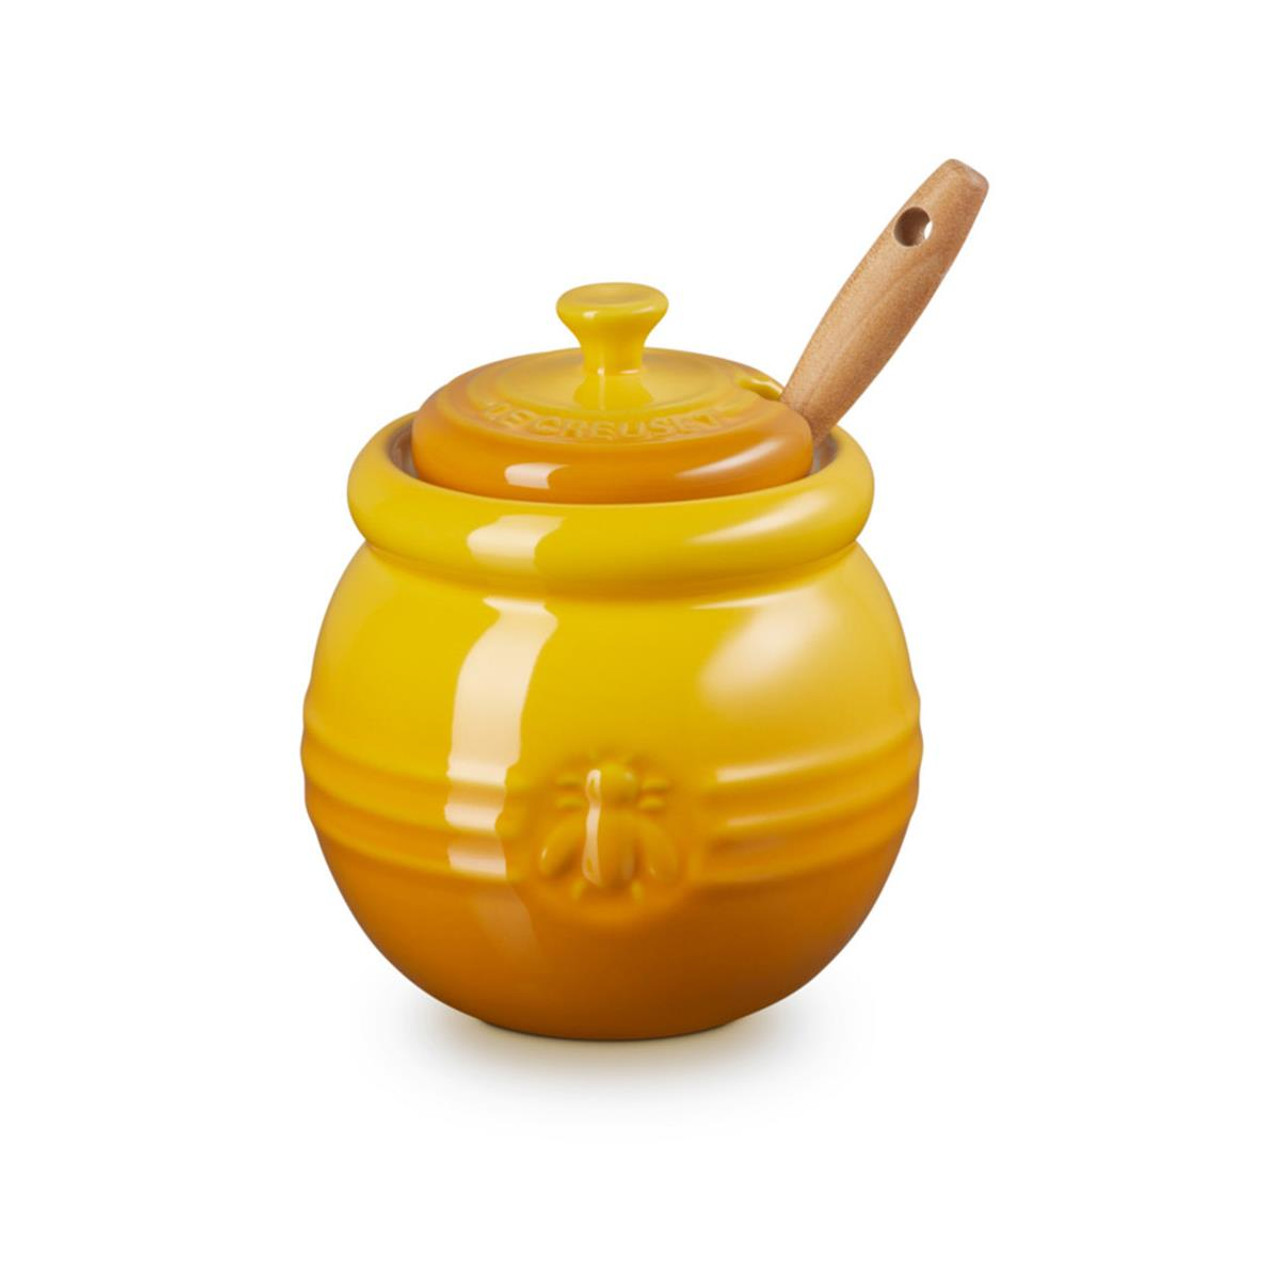 Why is the Le Creuset Honey Pot a great addition to breakfast?